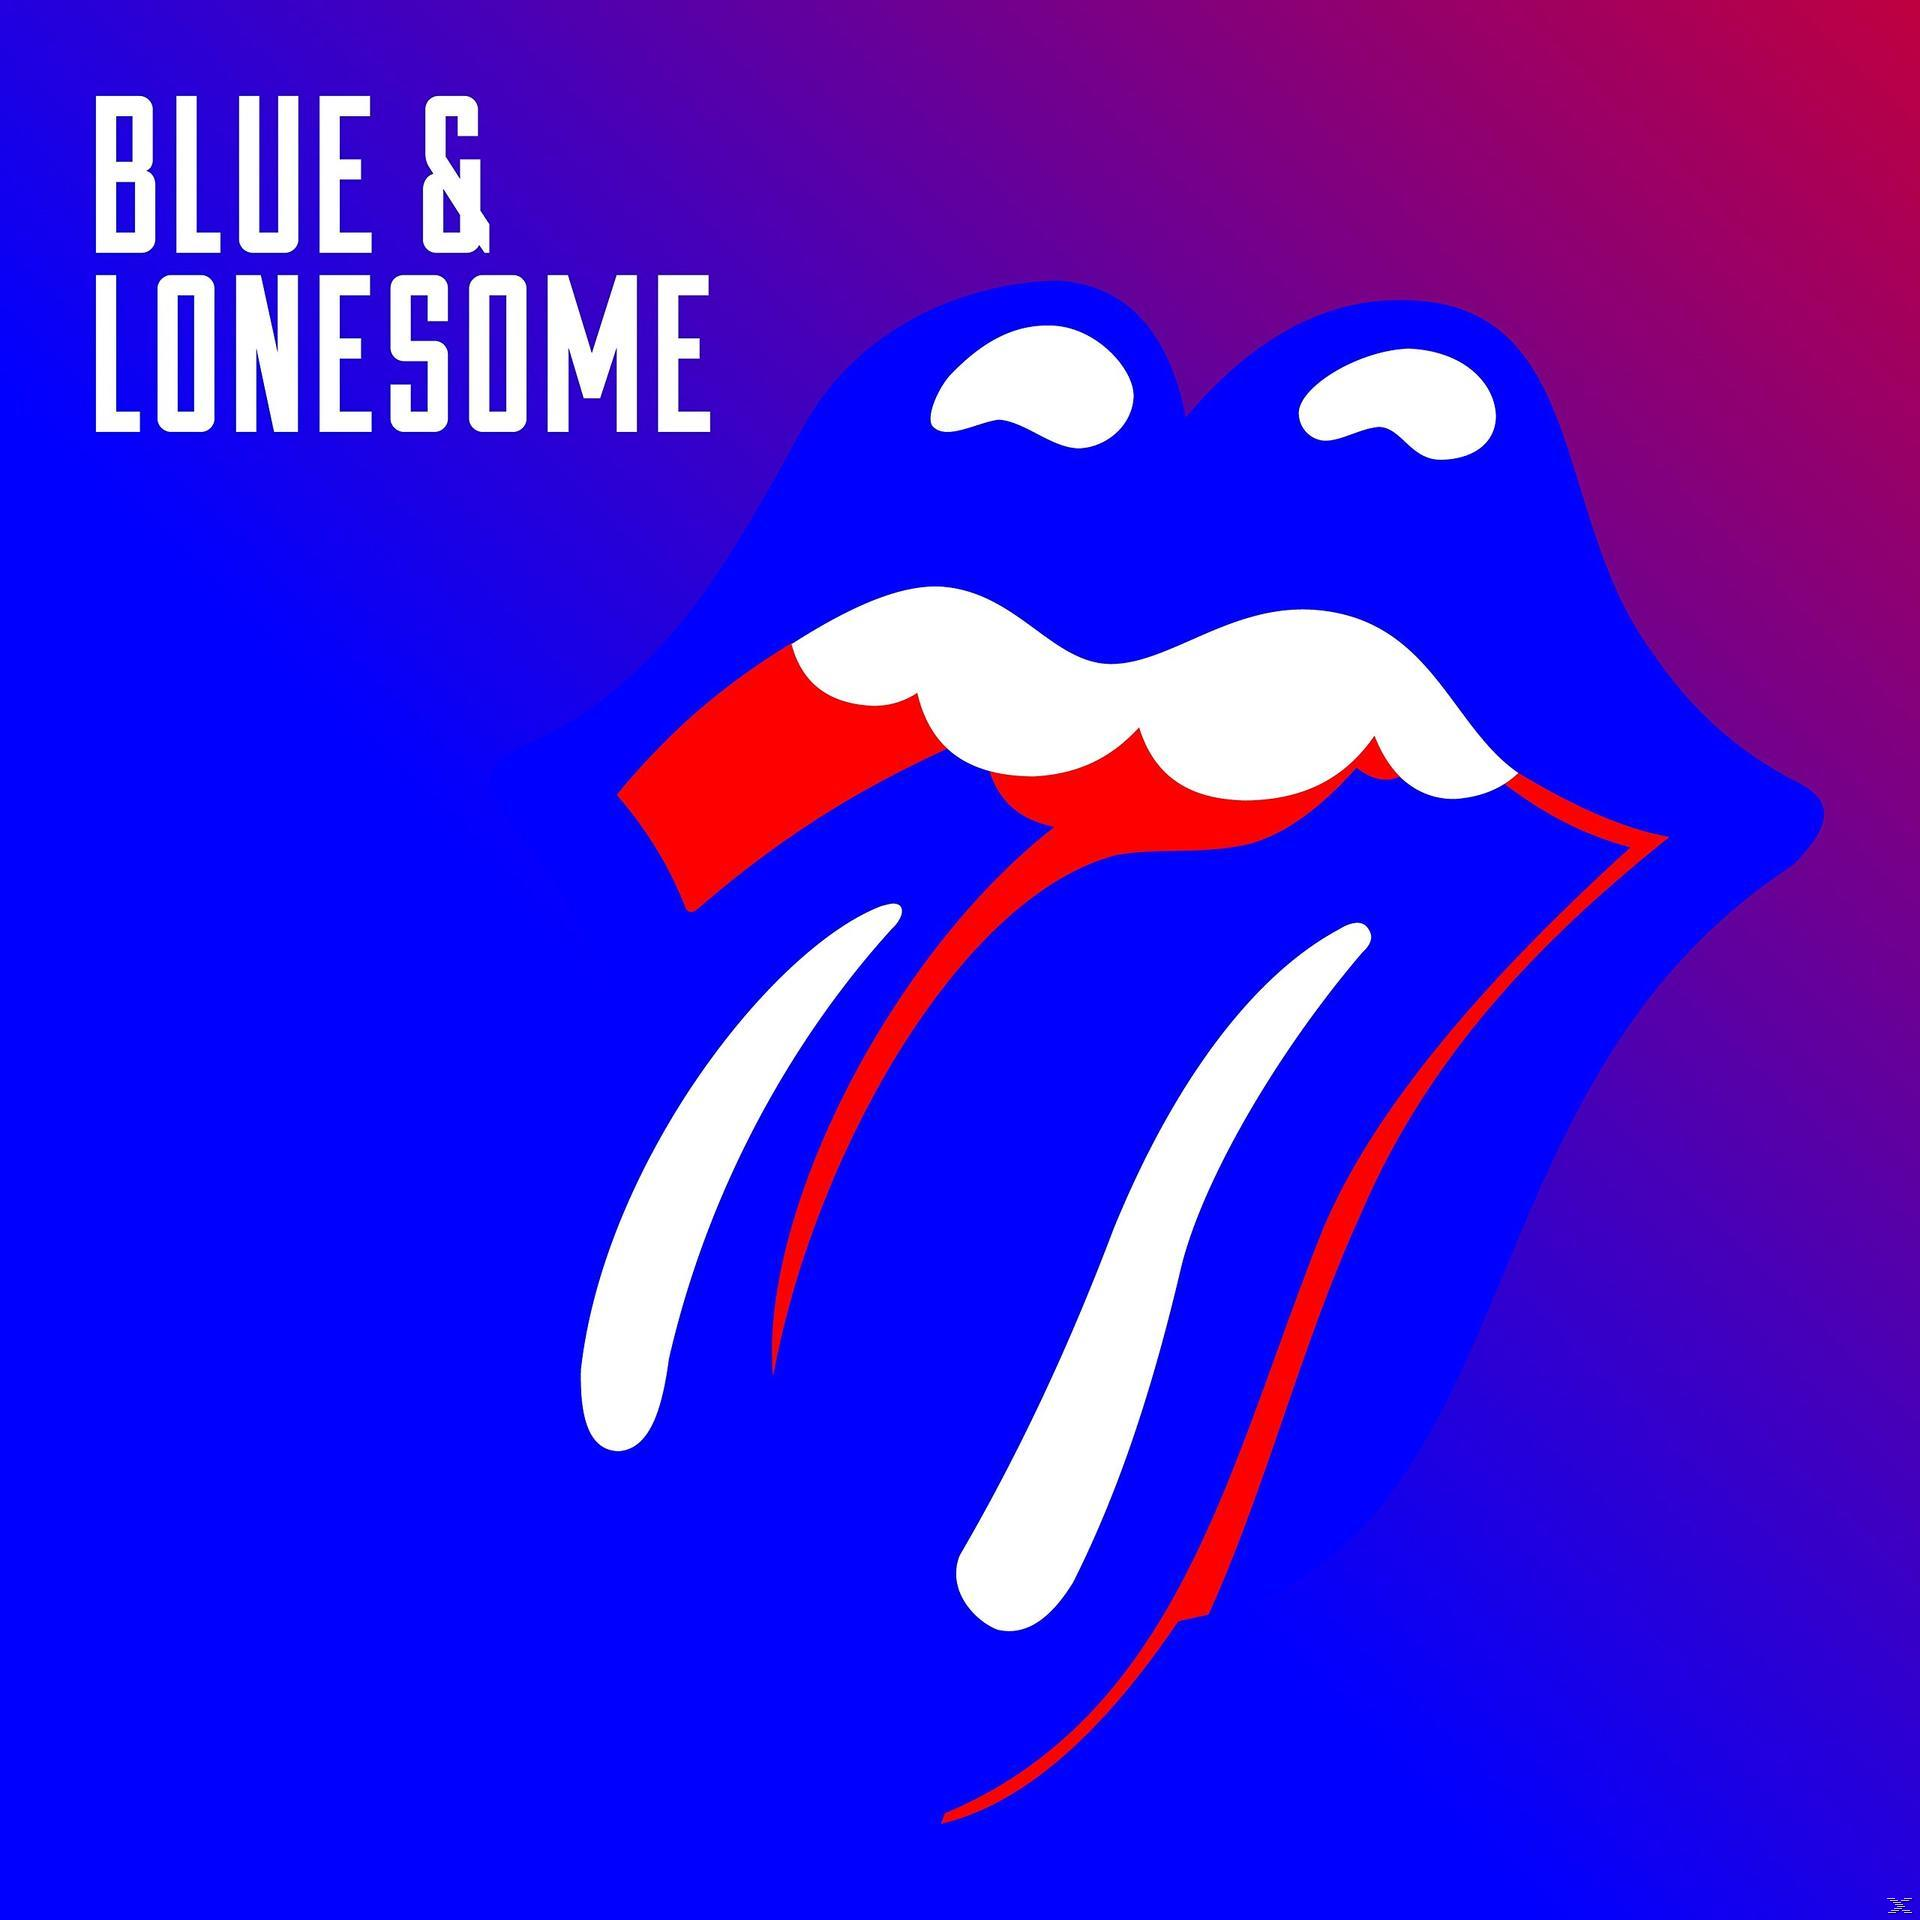 Lonesome Rolling - Stones - The and Blue (Vinyl)